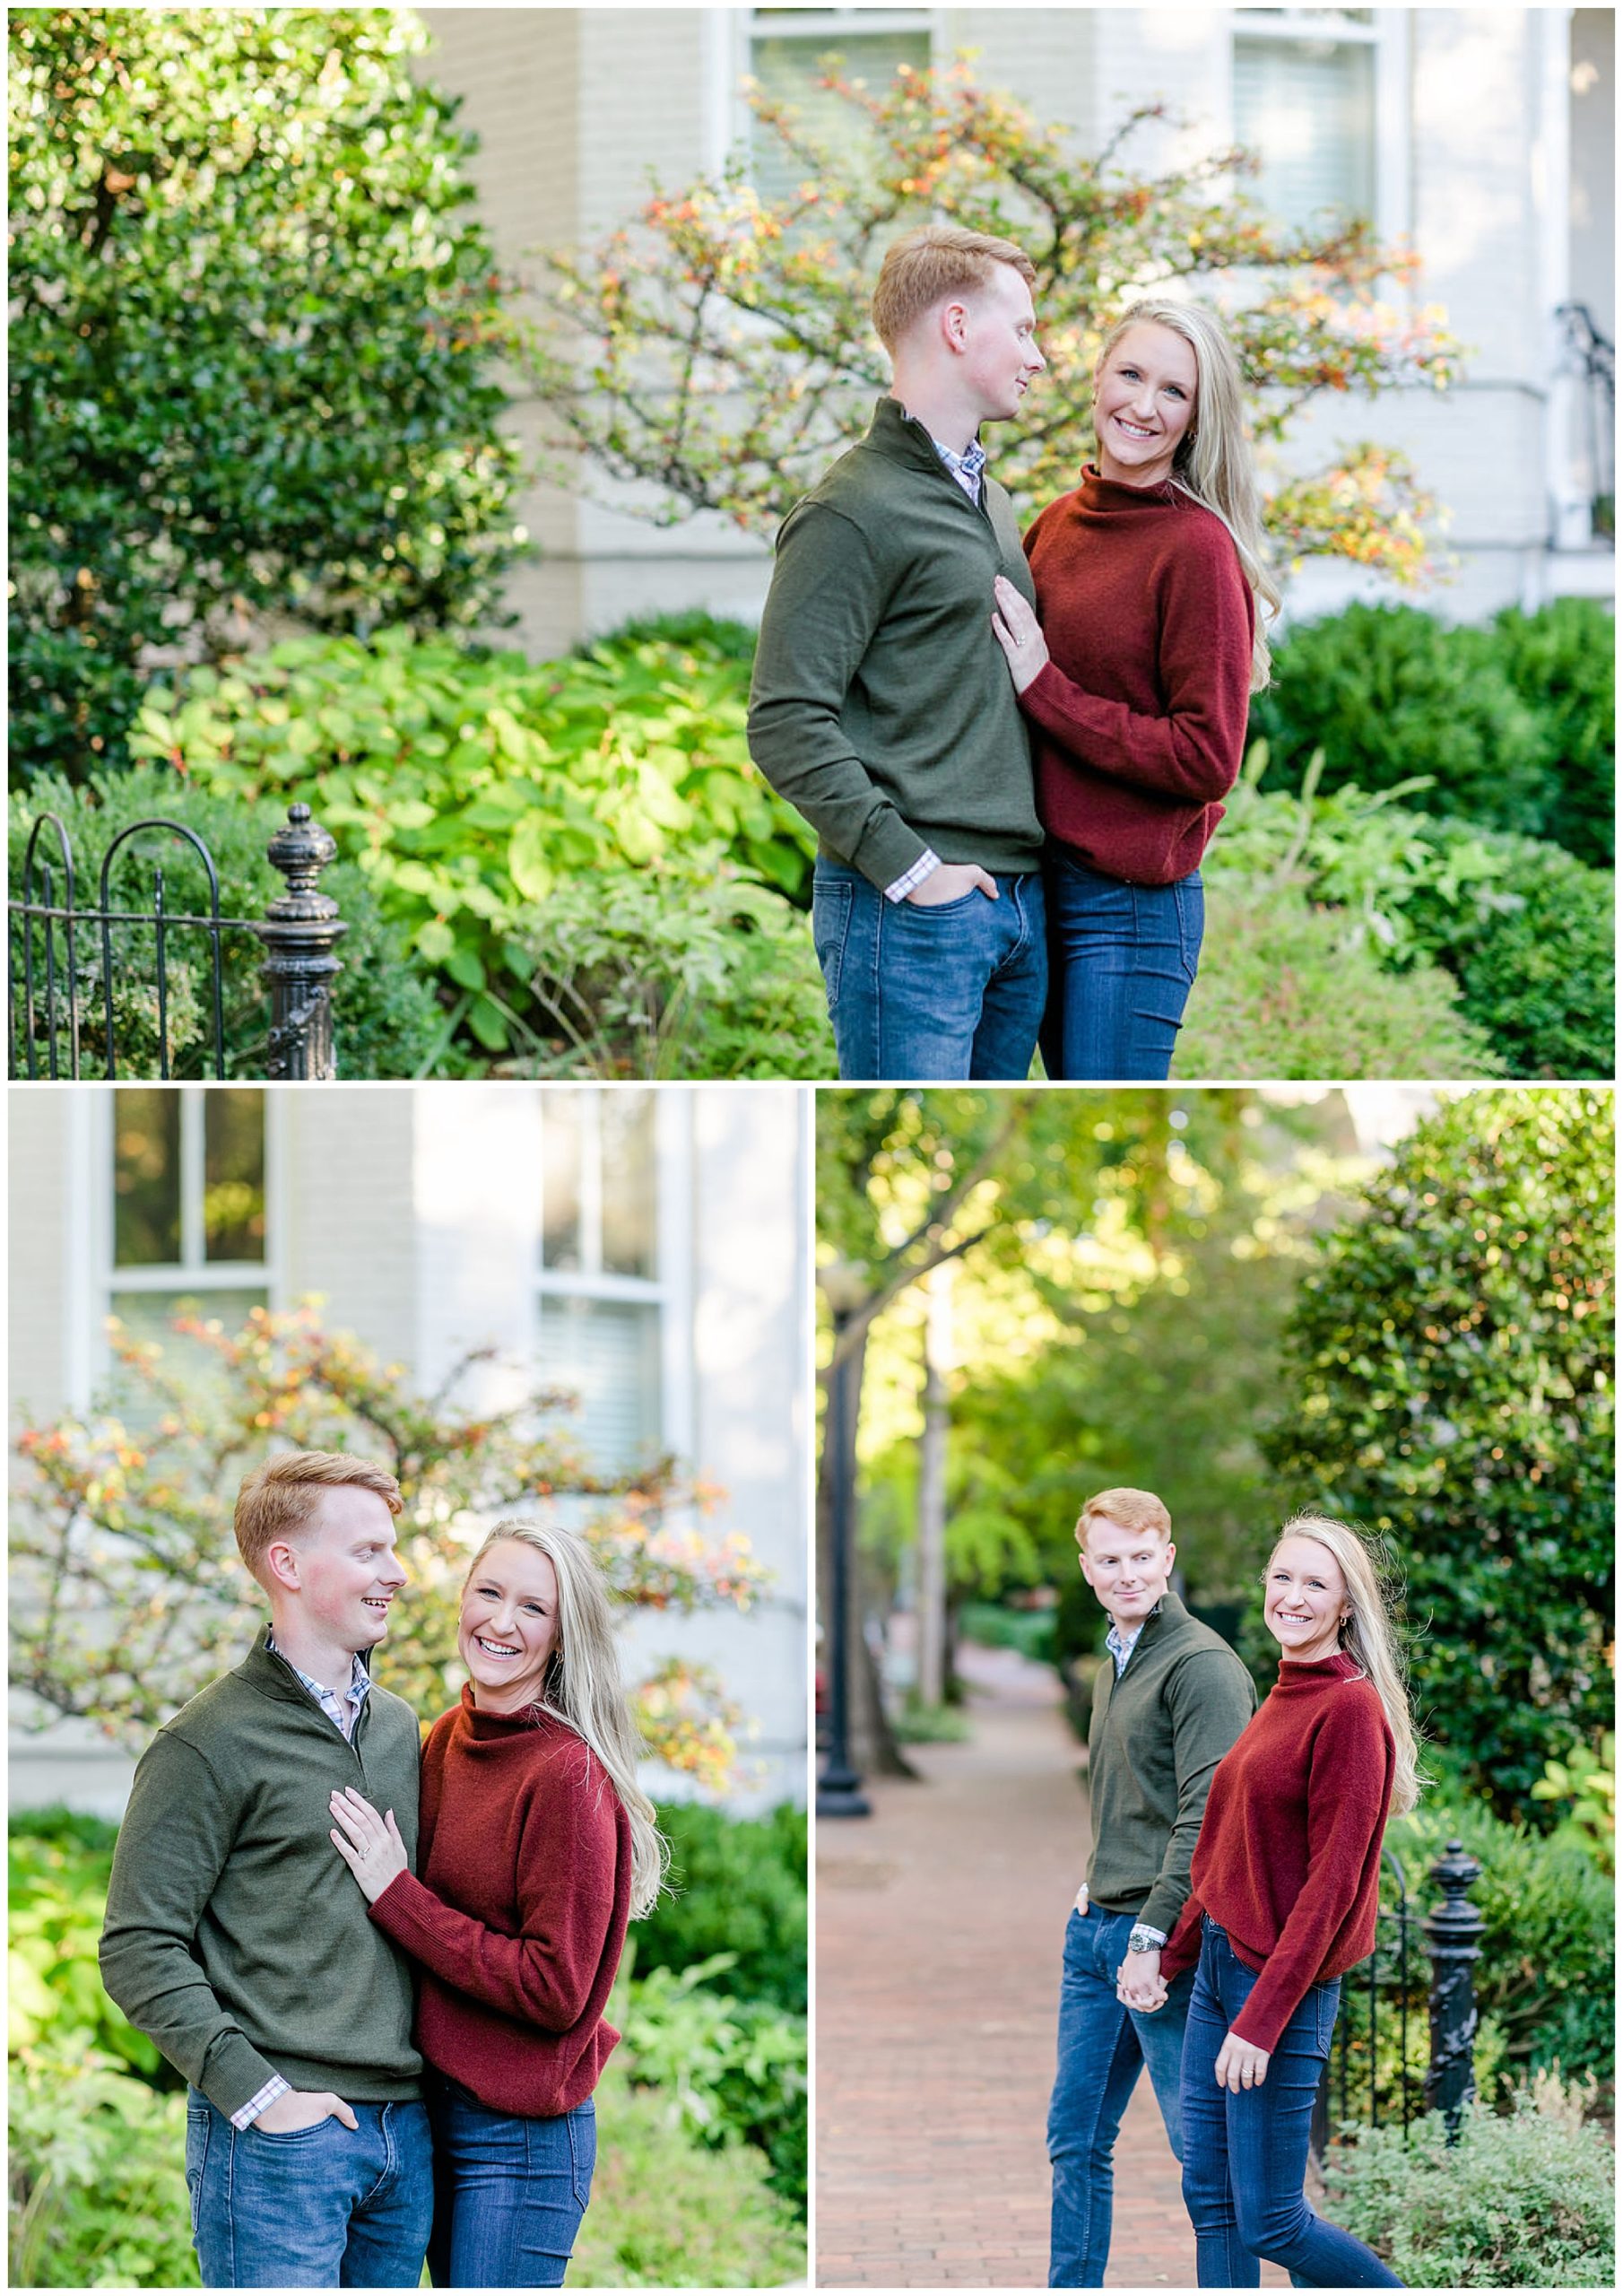 autumn magic hour engagement session, Washington D.C. engagement photos, Georgetown engagement photos, autumn engagement photos, DC portraits, DC engagement portraits, save the dates photos, Rachel E.H. Photography, woman's hand on mans chest, couple holding hands